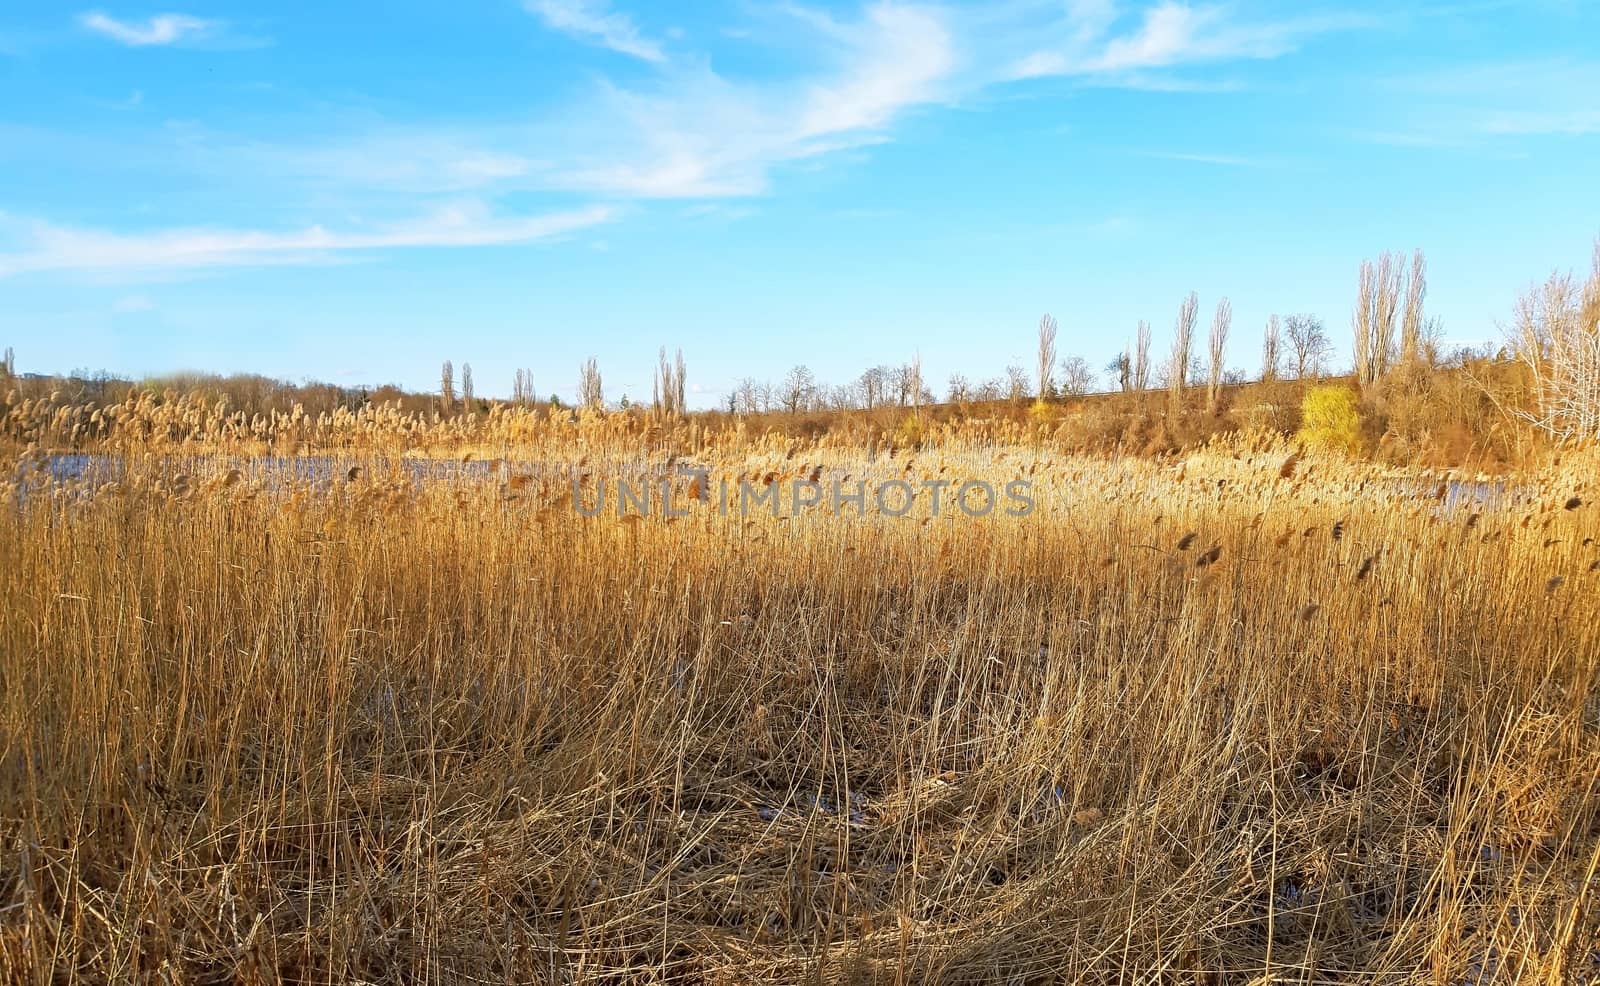 Phragmites on the shore of the lake.